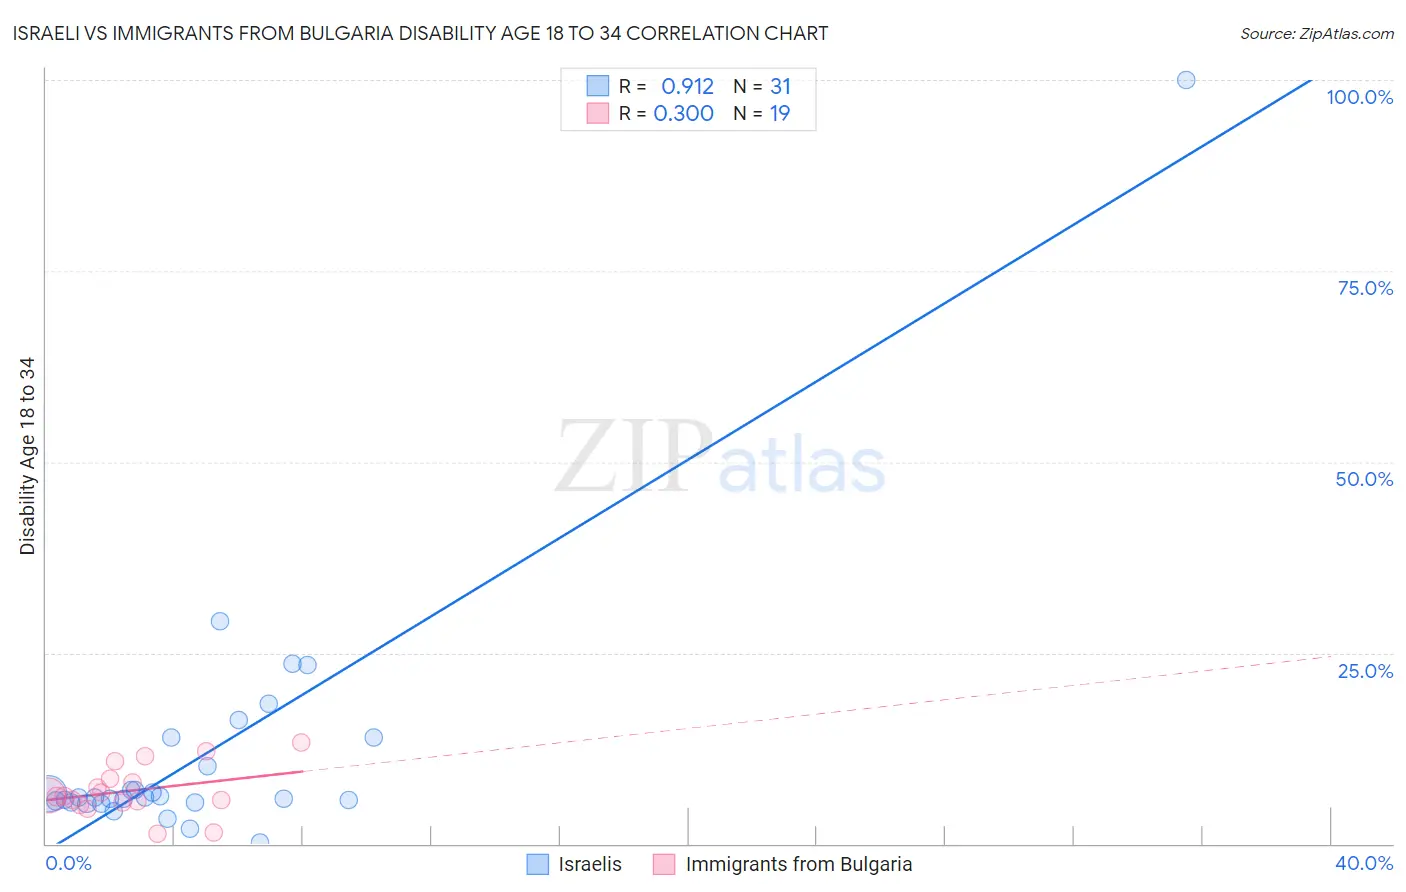 Israeli vs Immigrants from Bulgaria Disability Age 18 to 34